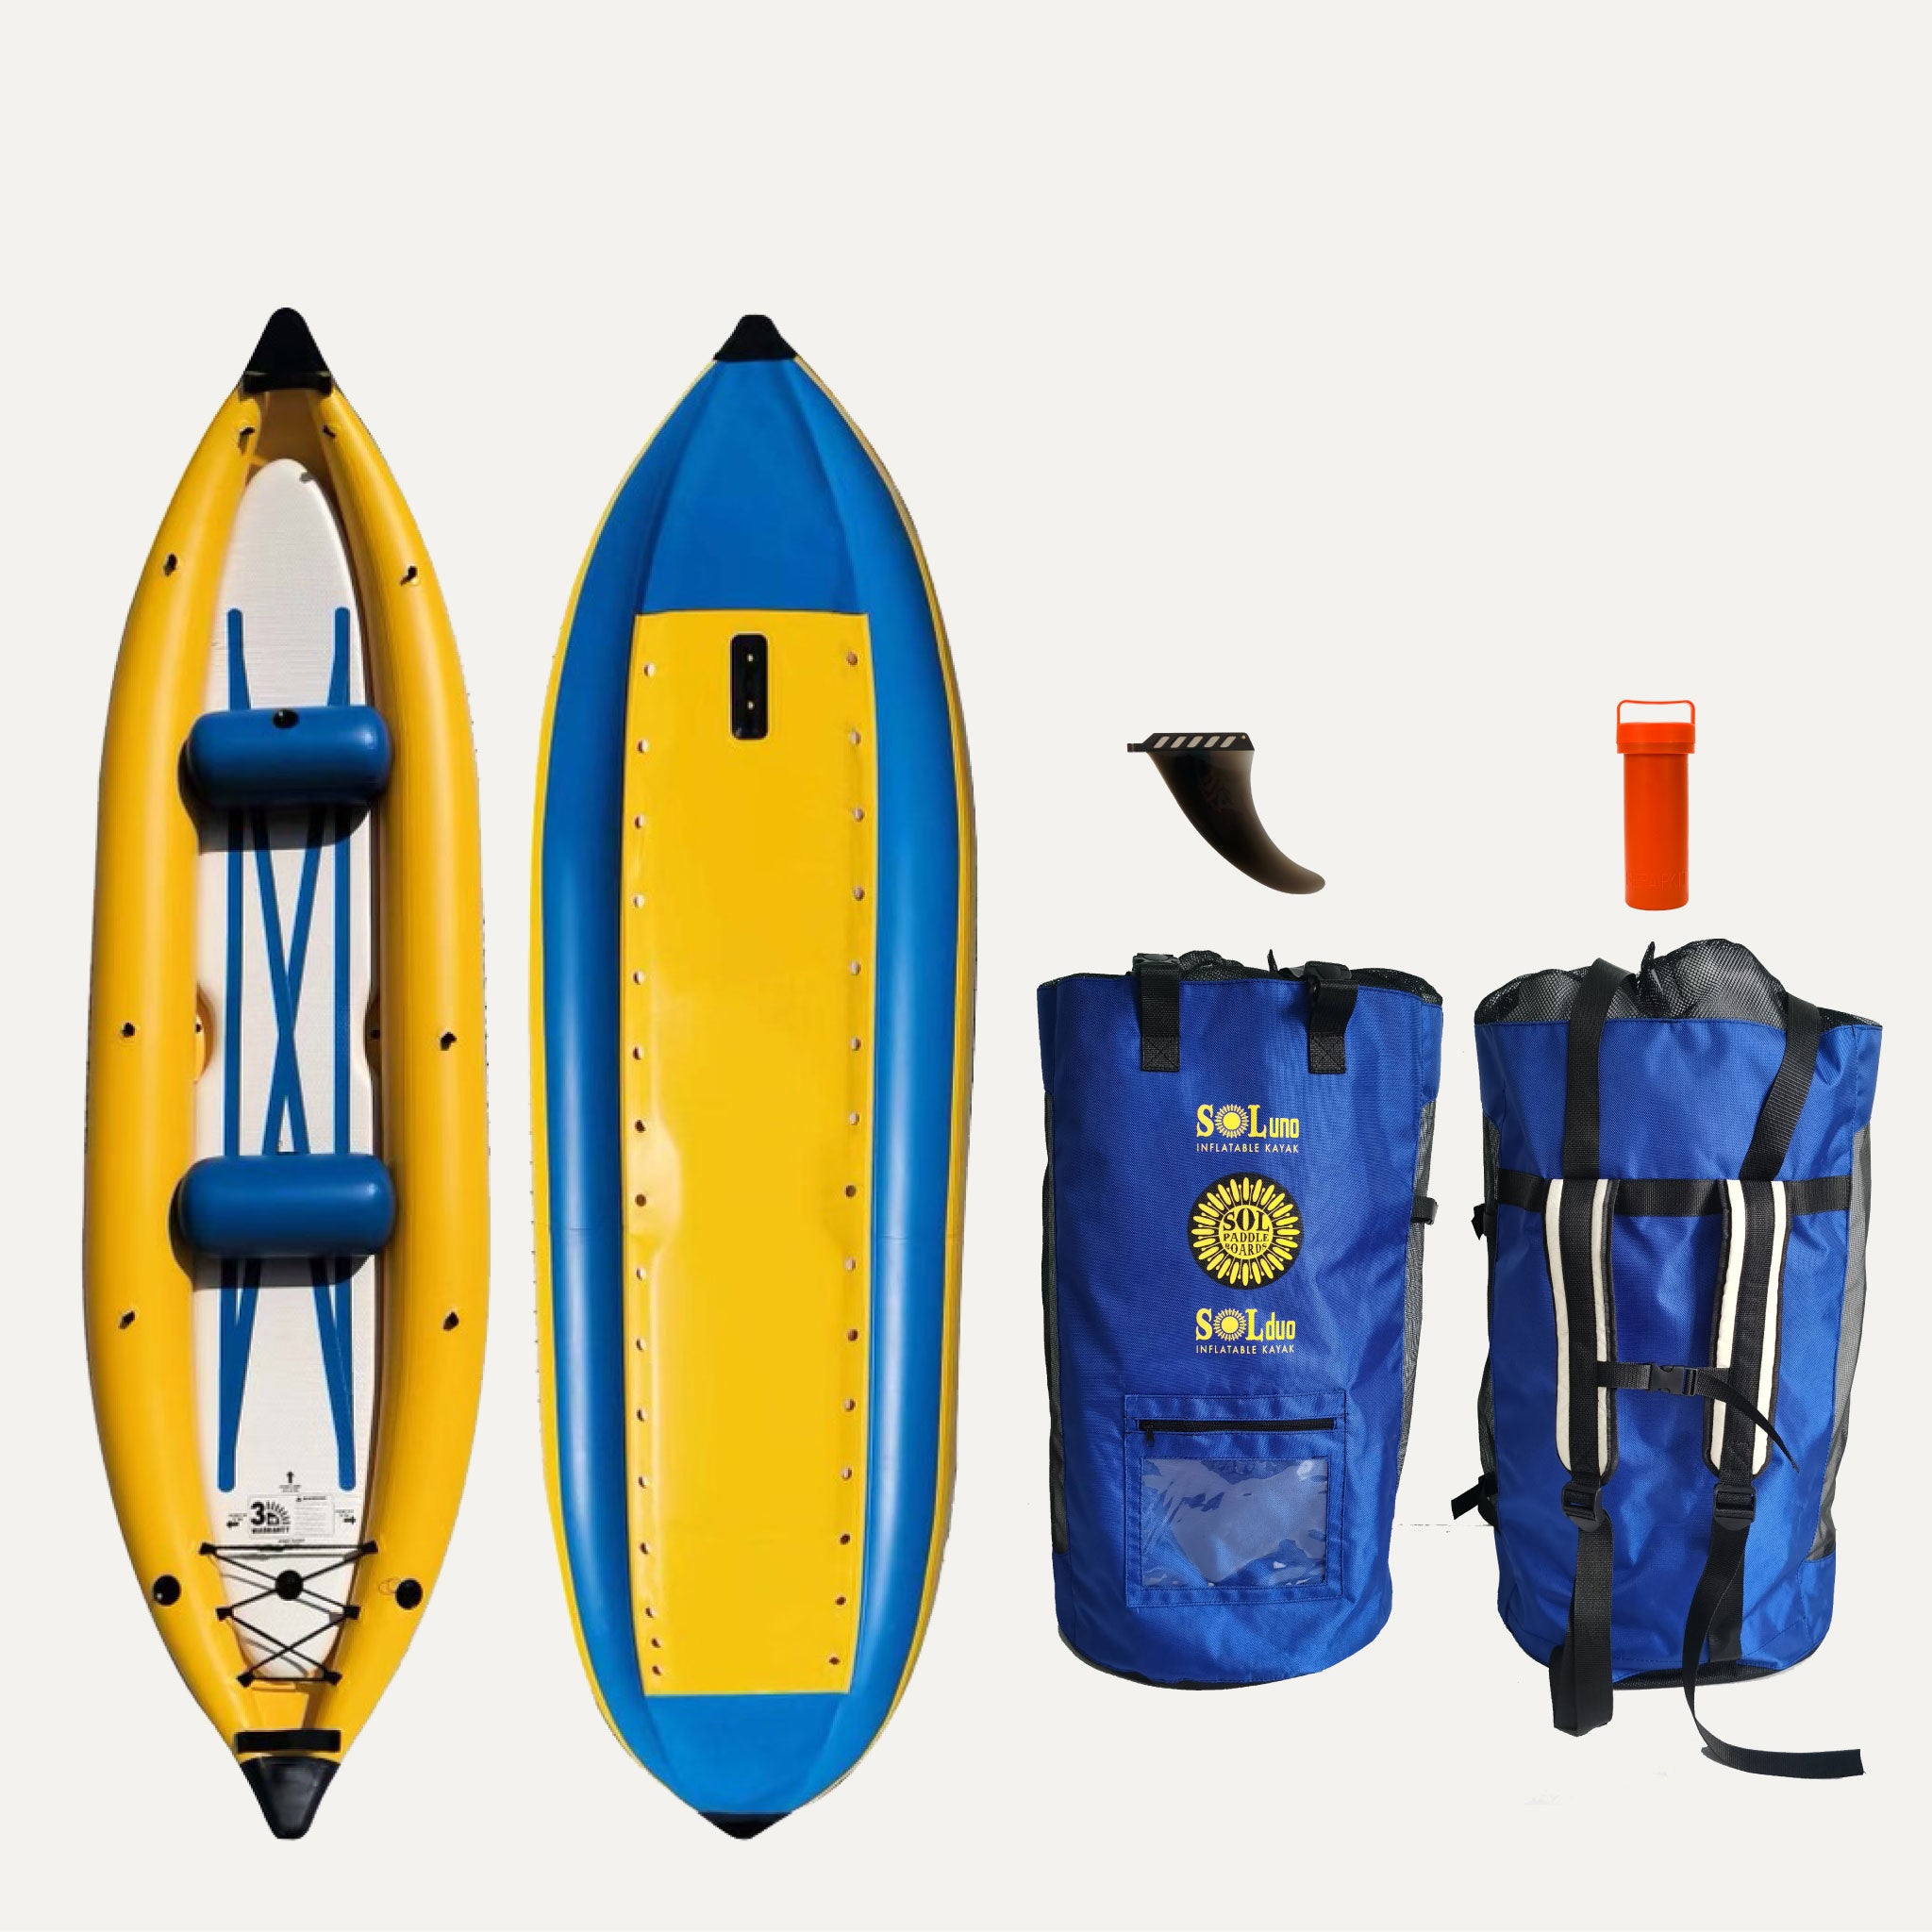 GalaXy SOLduo Double Inflatable Kayak showcasing the top and bottom views of the kayak and the accessories that come with it